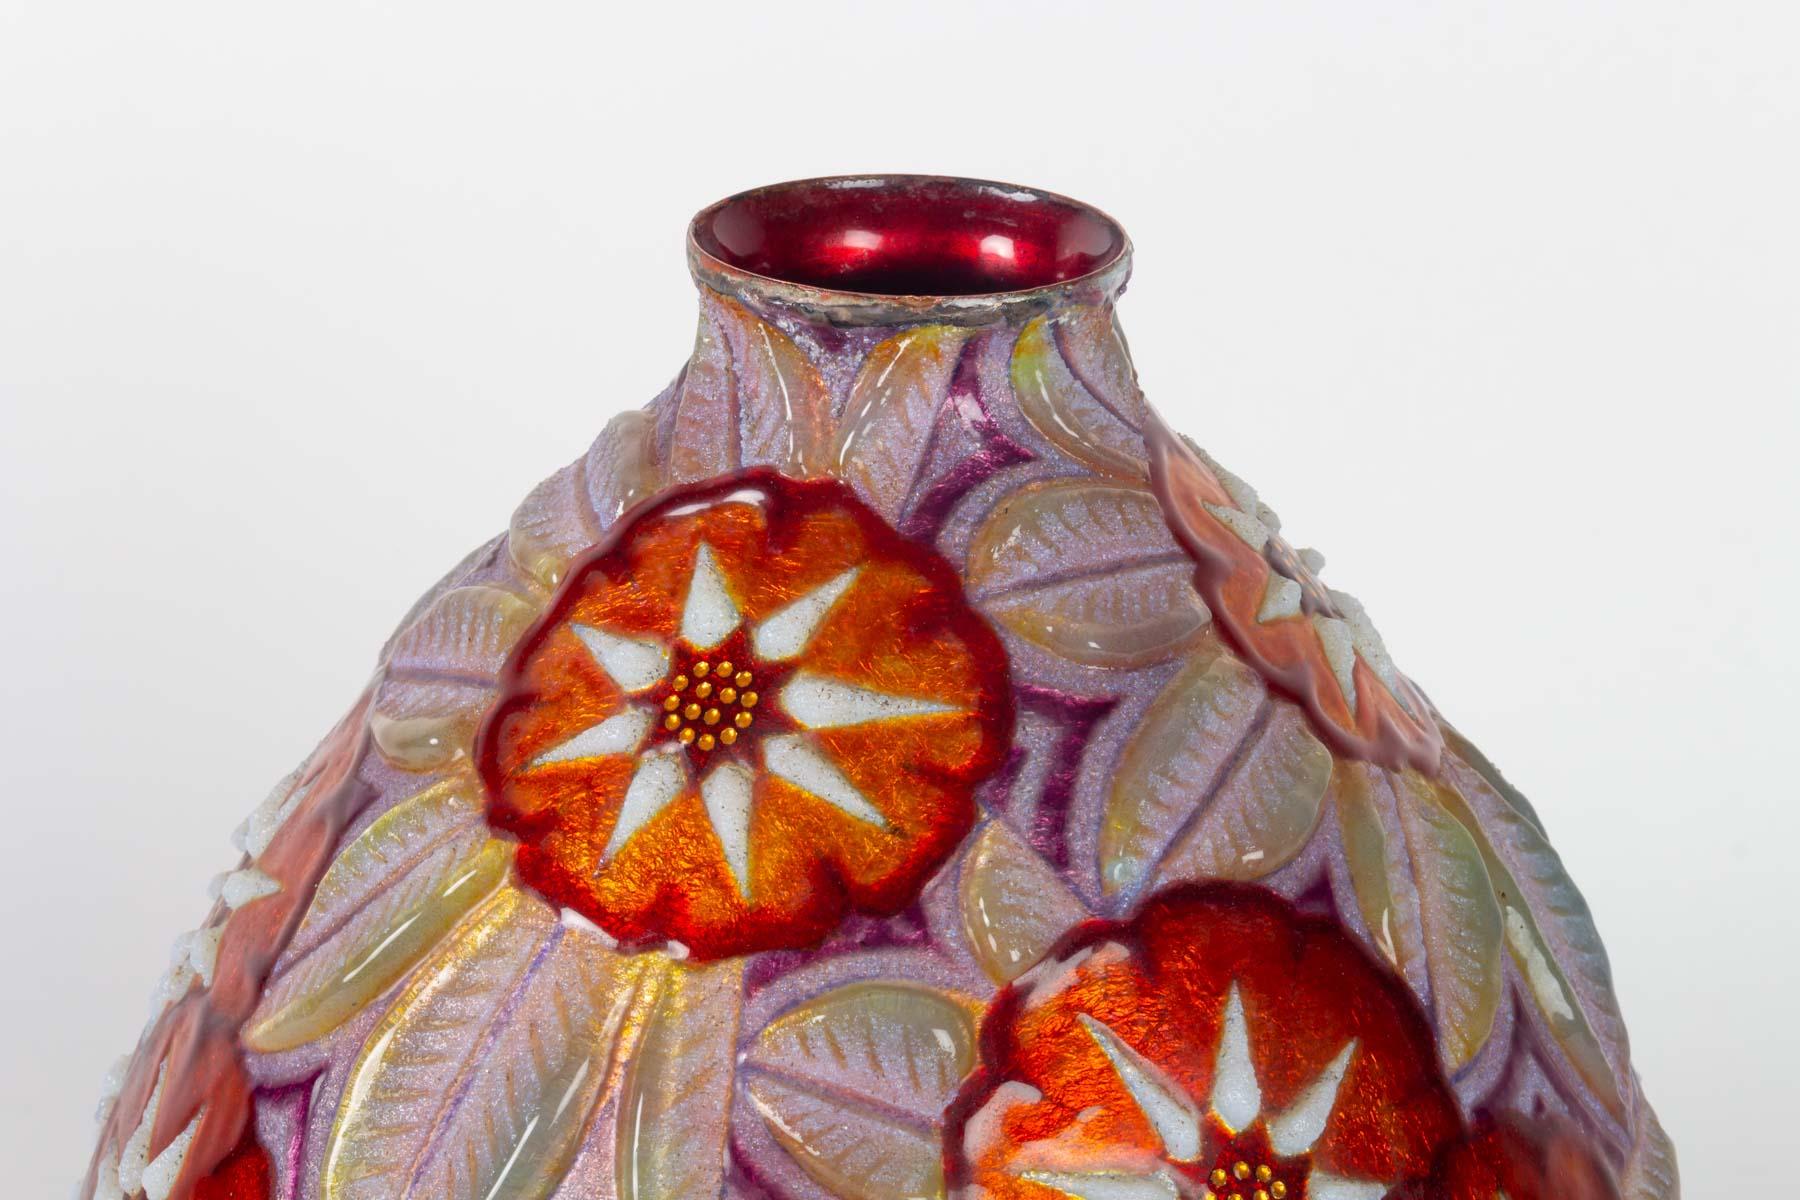 Camille Fauré enameled copper vase: Rare and important ovoid vase with narrow neck in copper decorated with polychrome and translucent enamel. Signed on the base C. Faure. Limoges: small neck strangled and slightly flared.
Copper proof with a rich